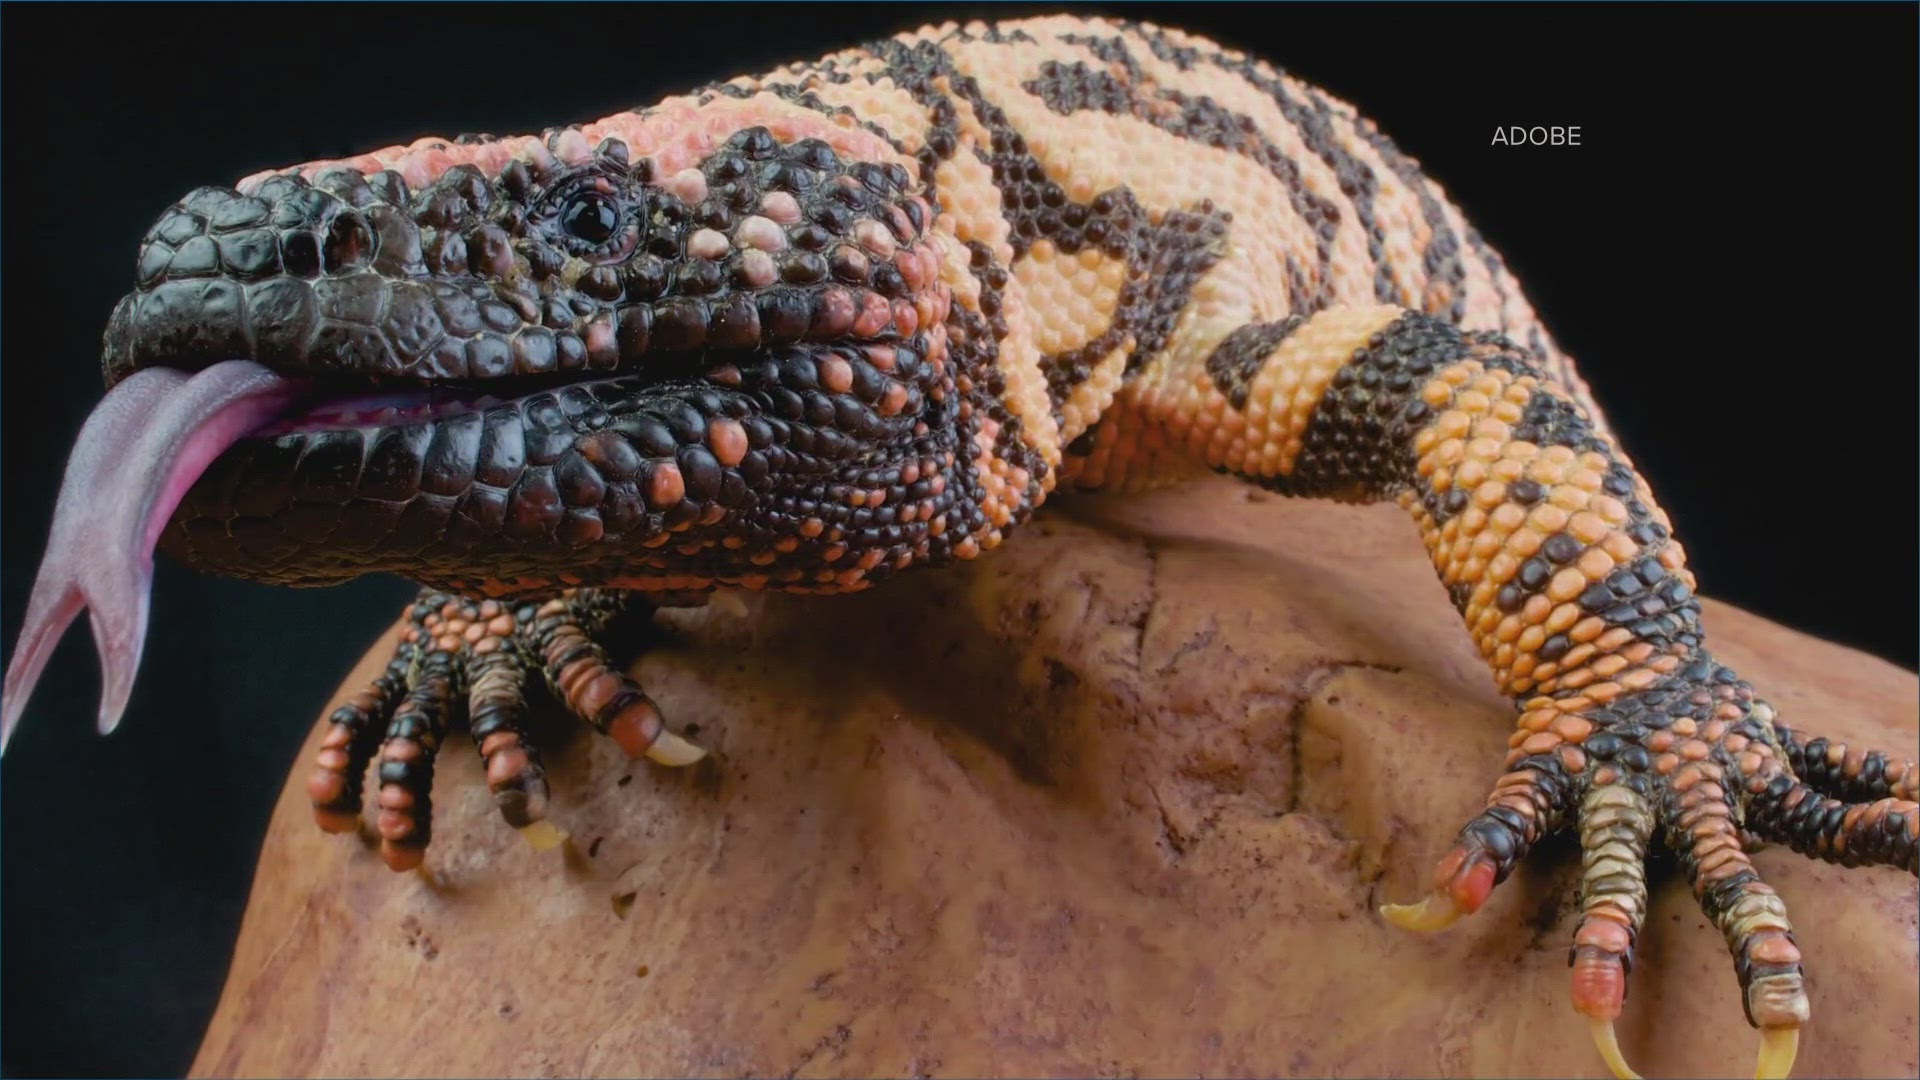 Both Gila monsters owned by a Lakewood man were purchased late last year, according to an animal control report.